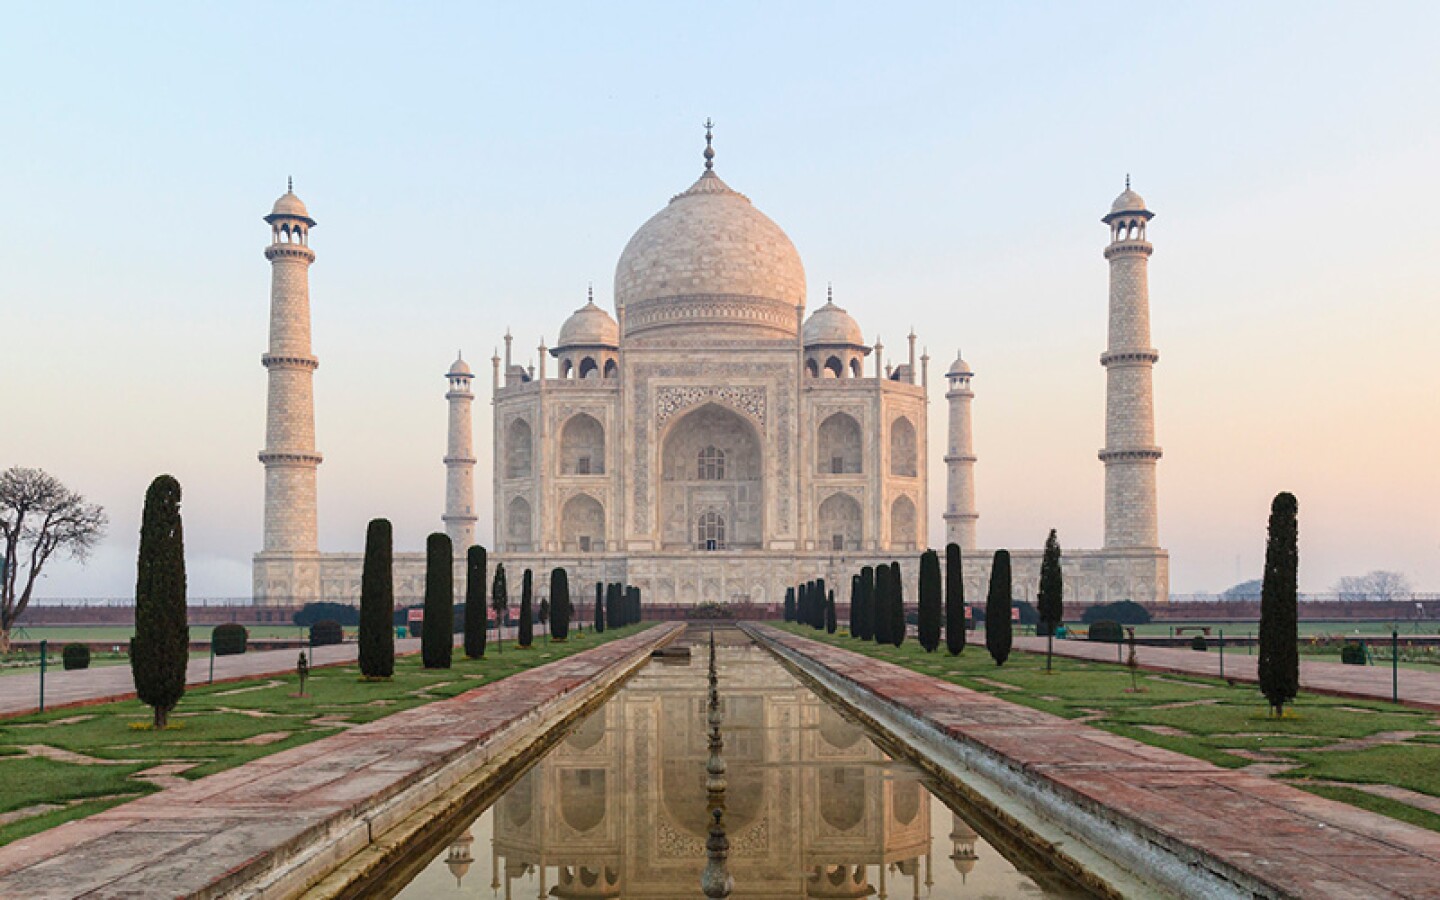 <h2>10. Taj Mahal</h2> <p><i>Agra, India</i></p> <p> The perfectly symmetrical <a class="Link" href="https://whc.unesco.org/en/list/252" rel="noopener">Taj Mahal</a> features a 240-foot-tall central dome and an exterior with inlaid semiprecious stones. Widely considered the most beautiful existing example of Mughal architecture, the white marble mausoleum was erected between 1631 and 1648 after Mughal Emperor Shah Jahan ordered its construction to honor his late wife. (He tapped approximately 20,000 of the best craftsmen from Central Asia to complete the project.) Jahan intended to build a second mausoleum for himself, but the building never came to fruition. After he passed away in 1666, the emperor was buried next to his wife. Visitors to this World Heritage site can explore the grounds’ vast garden featuring long reflecting pools of water and a red sandstone gate. </p> <h3>How to visit</h3> <p> Most people visit the Taj Mahal on a day trip from Delhi. There are many high-speed trains to Agra from Delhi, Varanasi, and cities across northern India’s Rajasthan state. Tickets cost approximately $13 for adults; entry for children 15 and younger is free.</p>